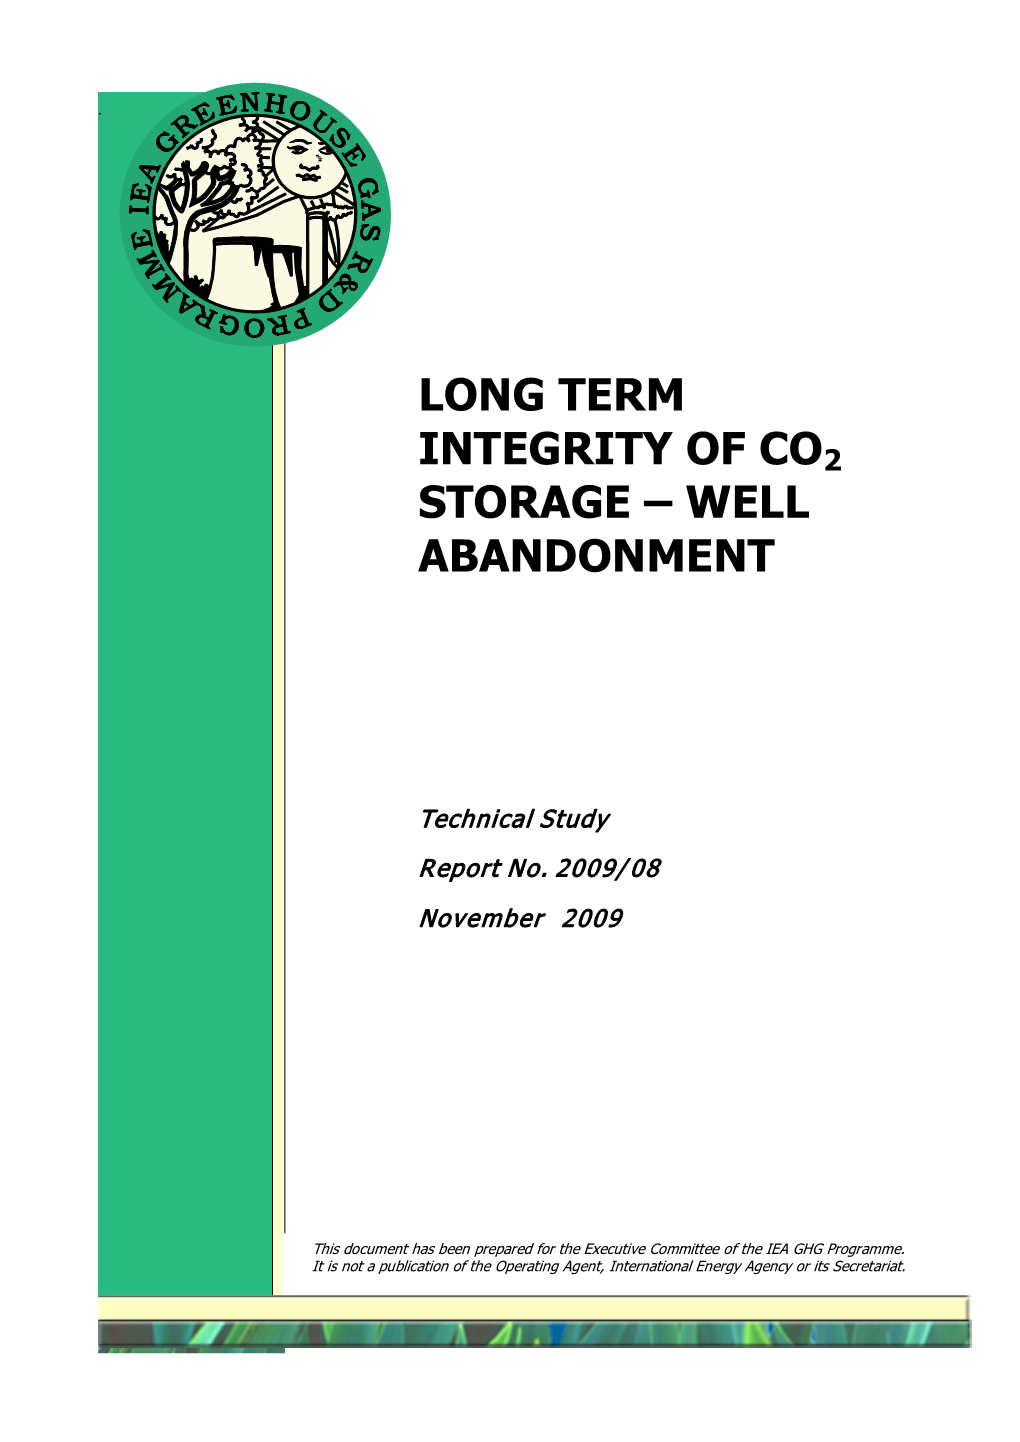 Opportunities for Early Application of Co2